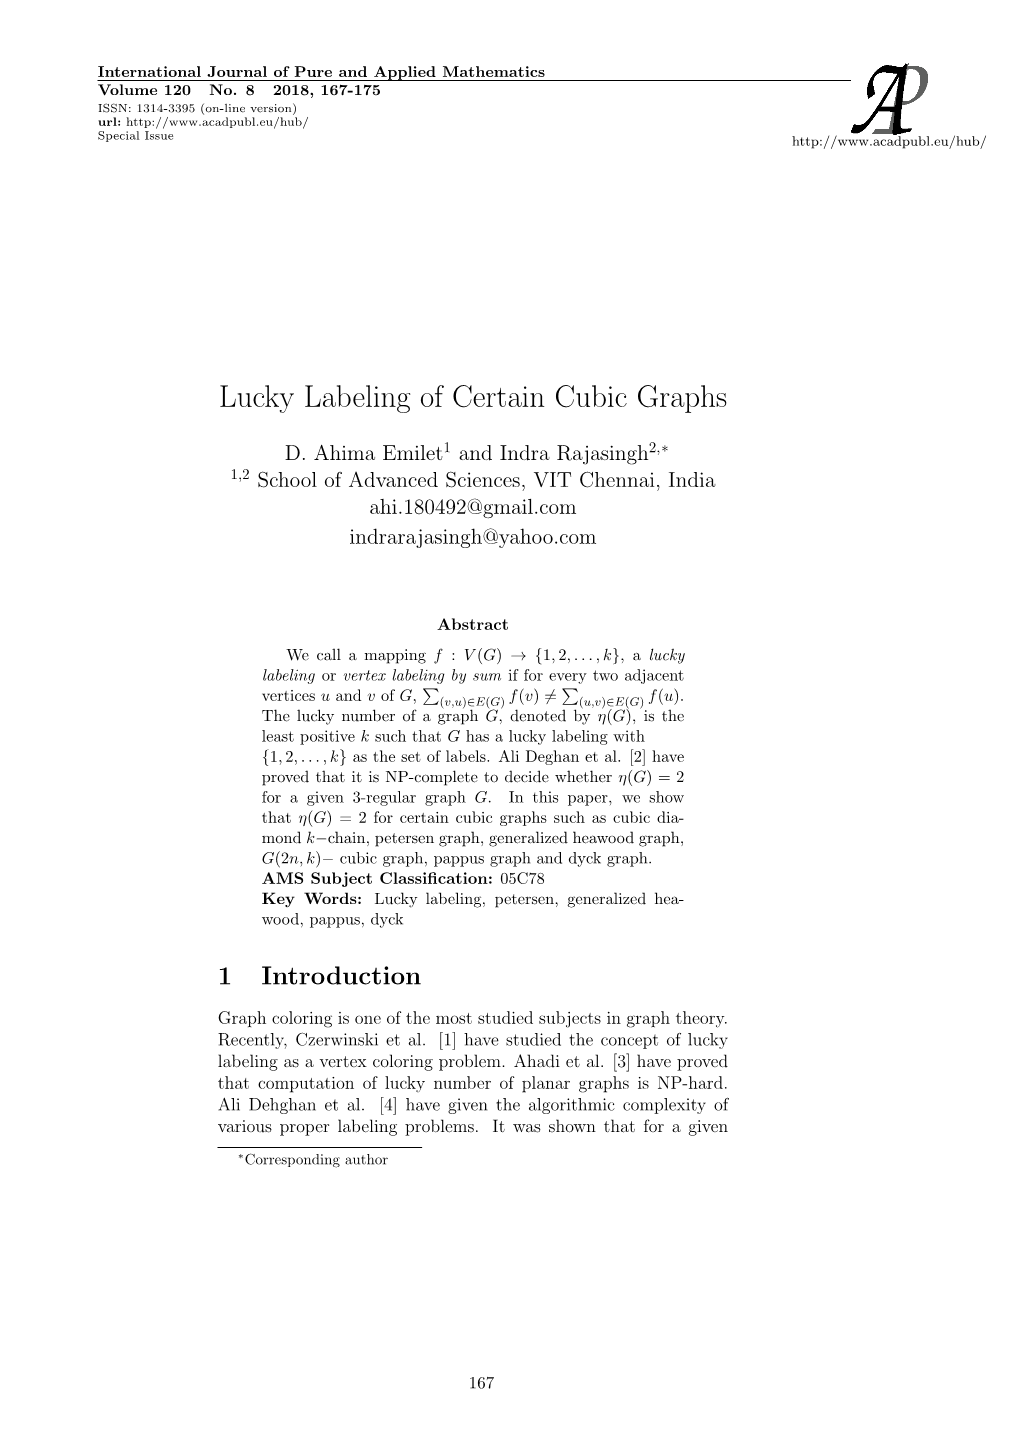 Lucky Labeling of Certain Cubic Graphs